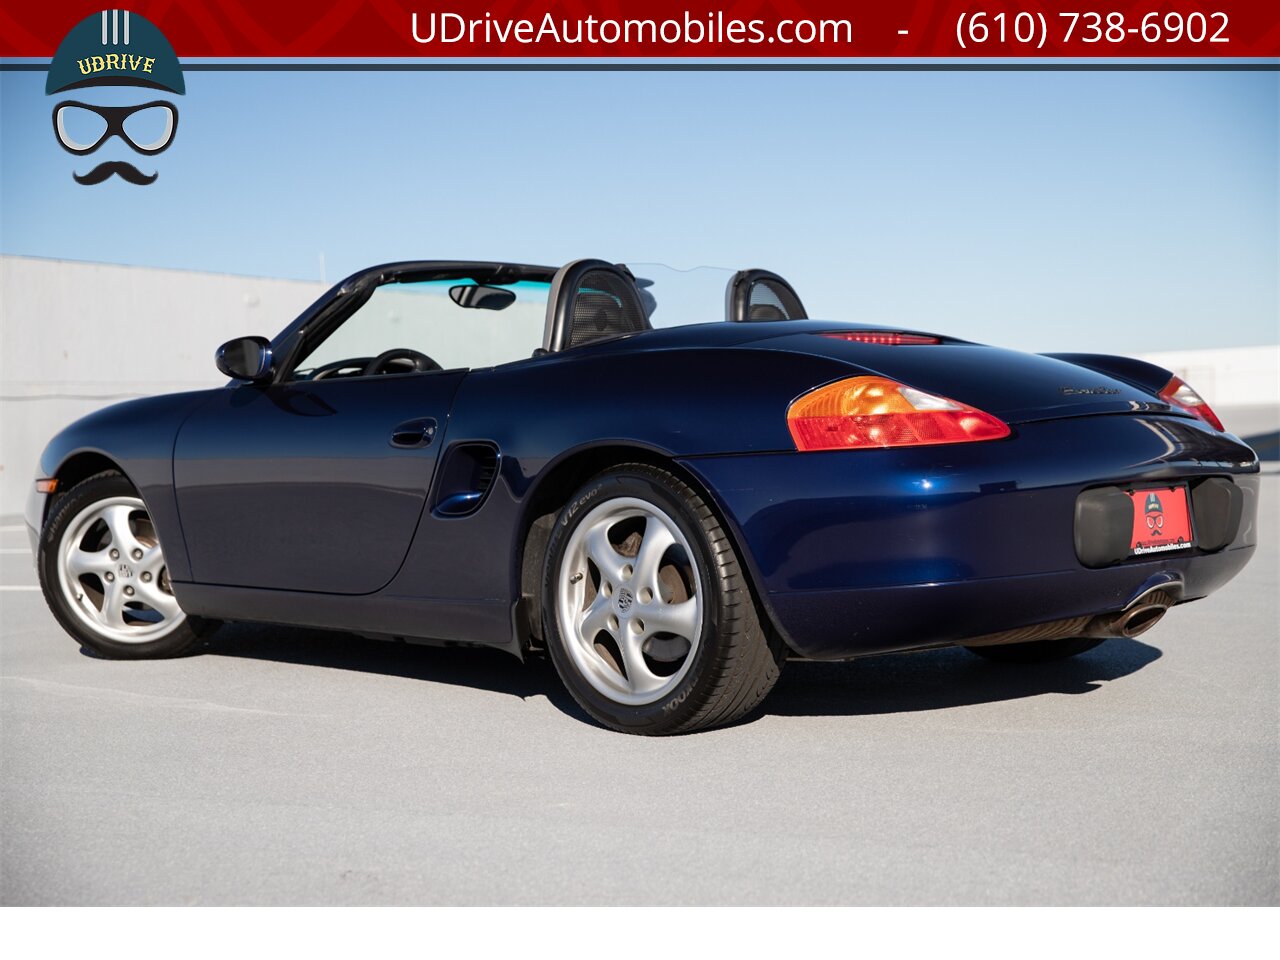 2001 Porsche Boxster 5 Speed Manual Detailed Service History  Same Owner for Last 18 Years Hard Top Included - Photo 4 - West Chester, PA 19382